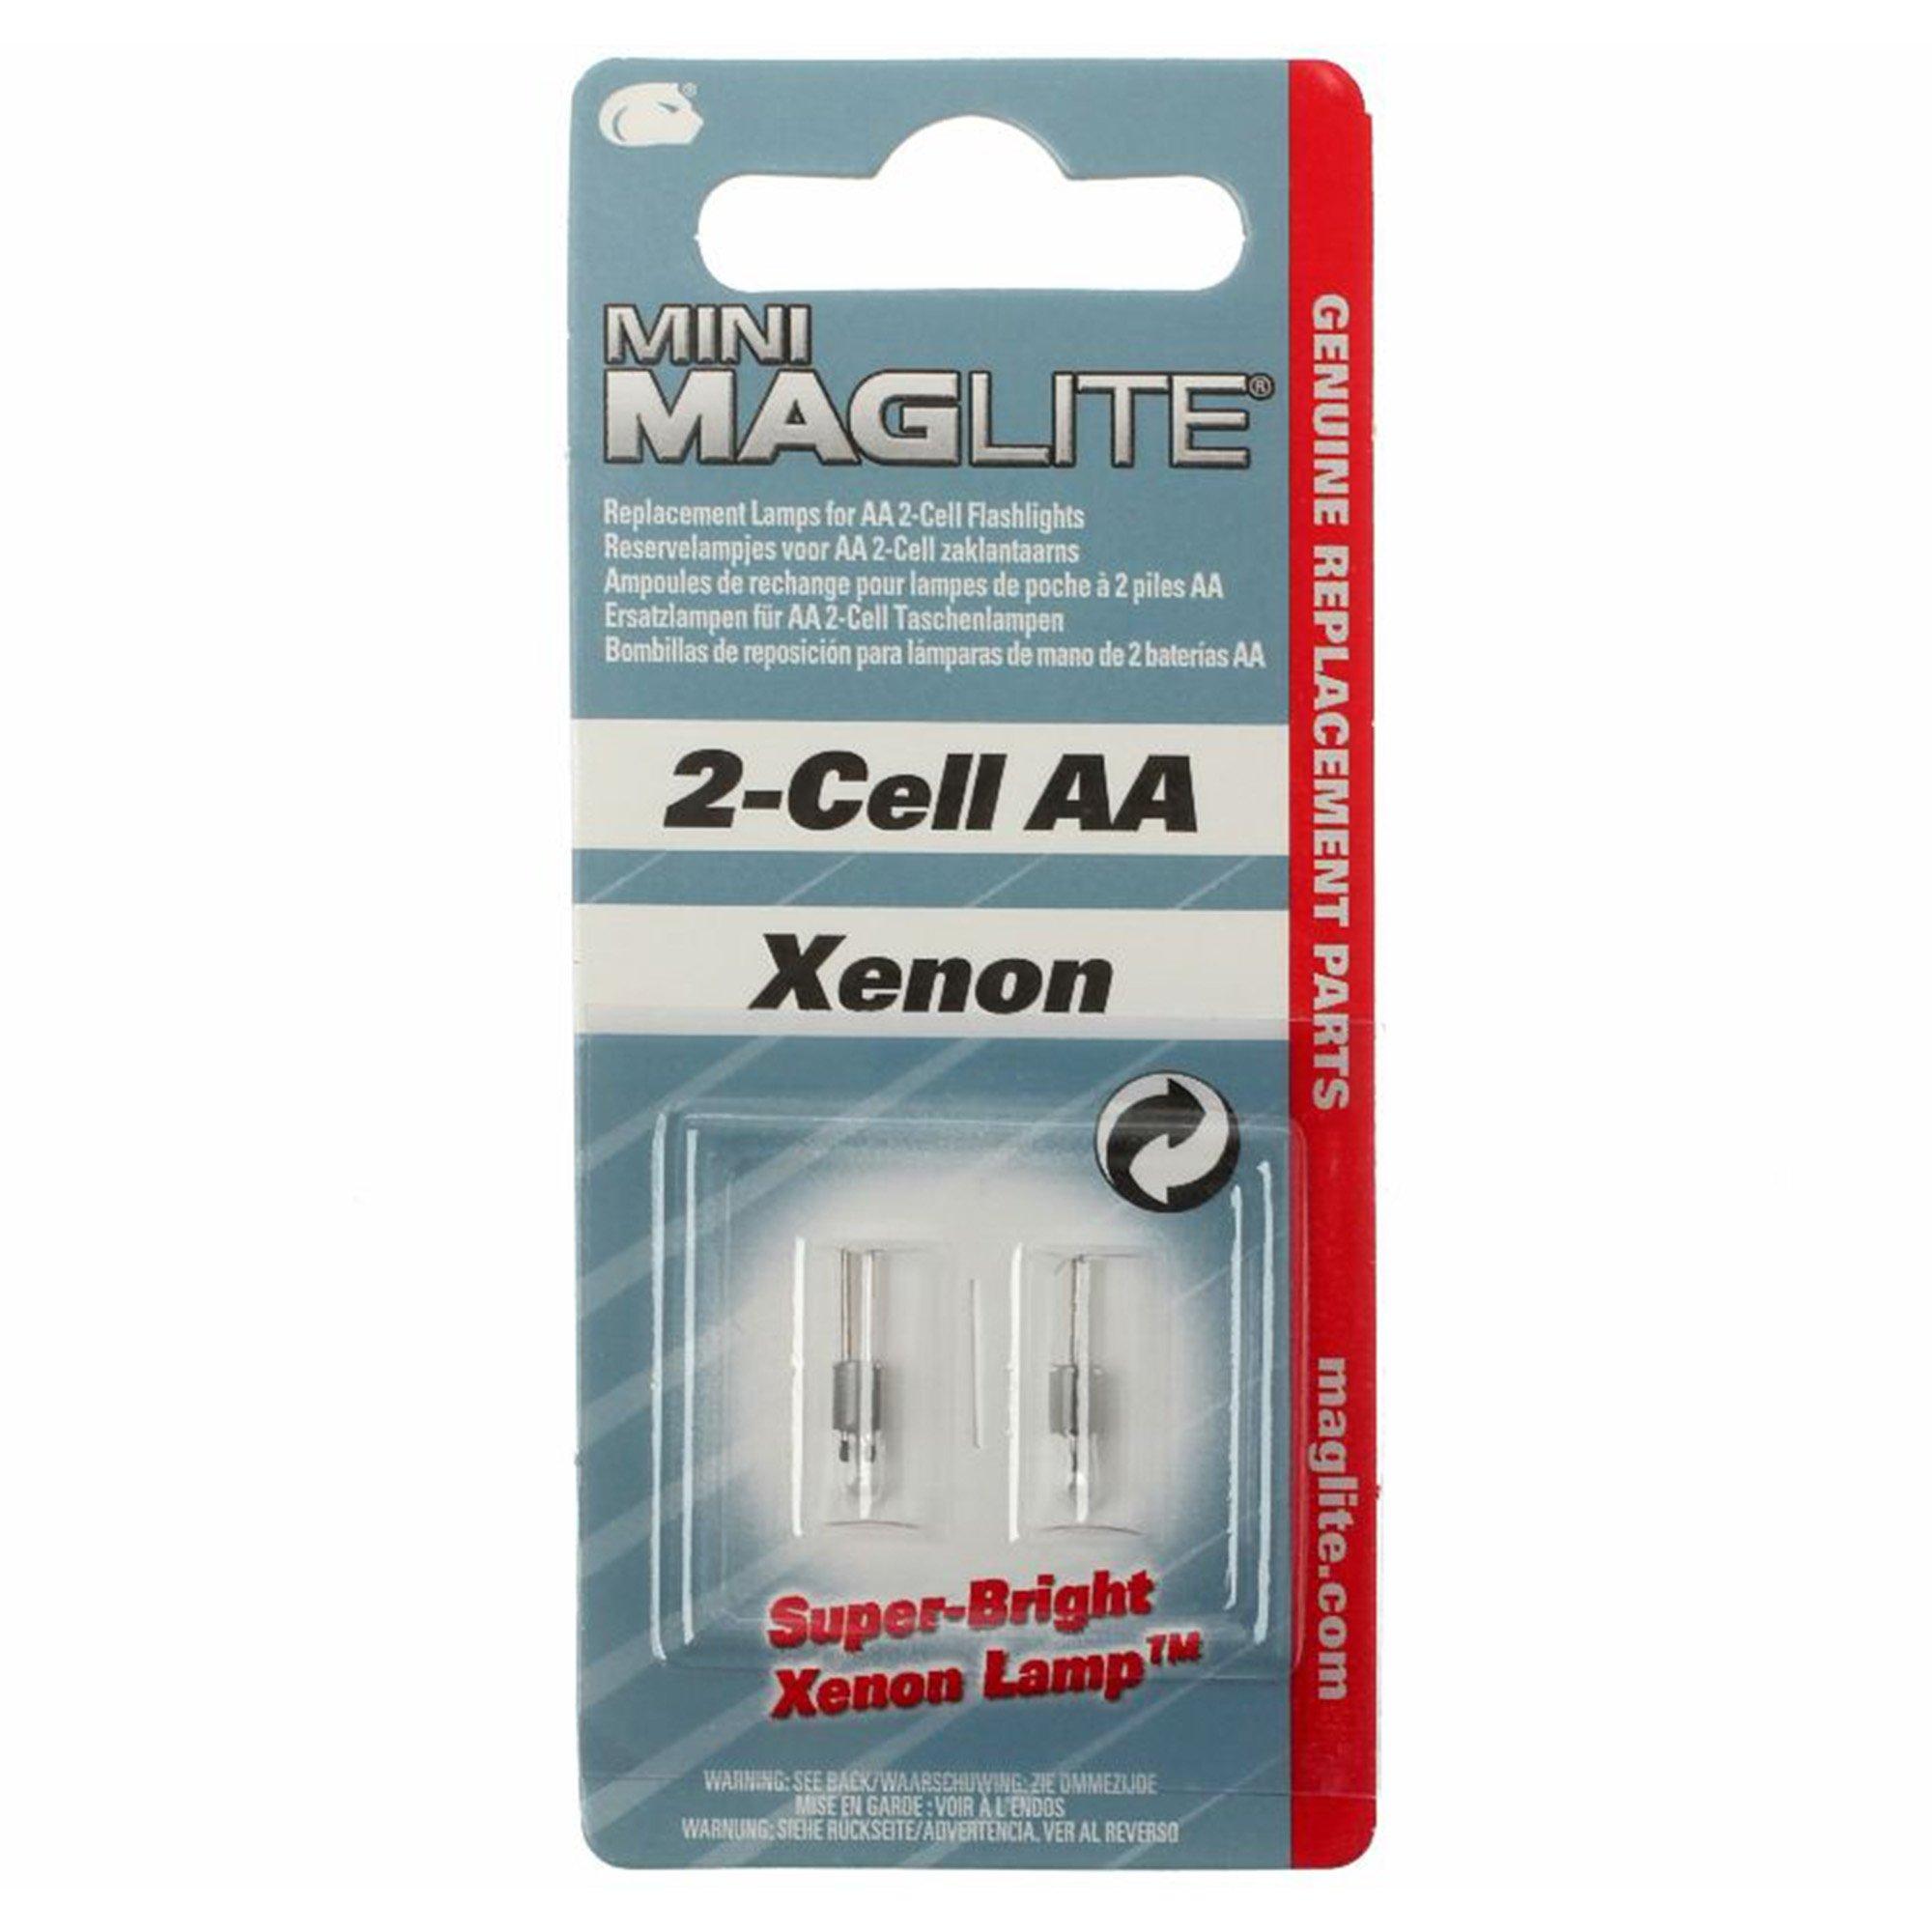 Replacement Xenon Lamp-Bulb for Mini Maglite 2-Cell AA/AAA Flashlight